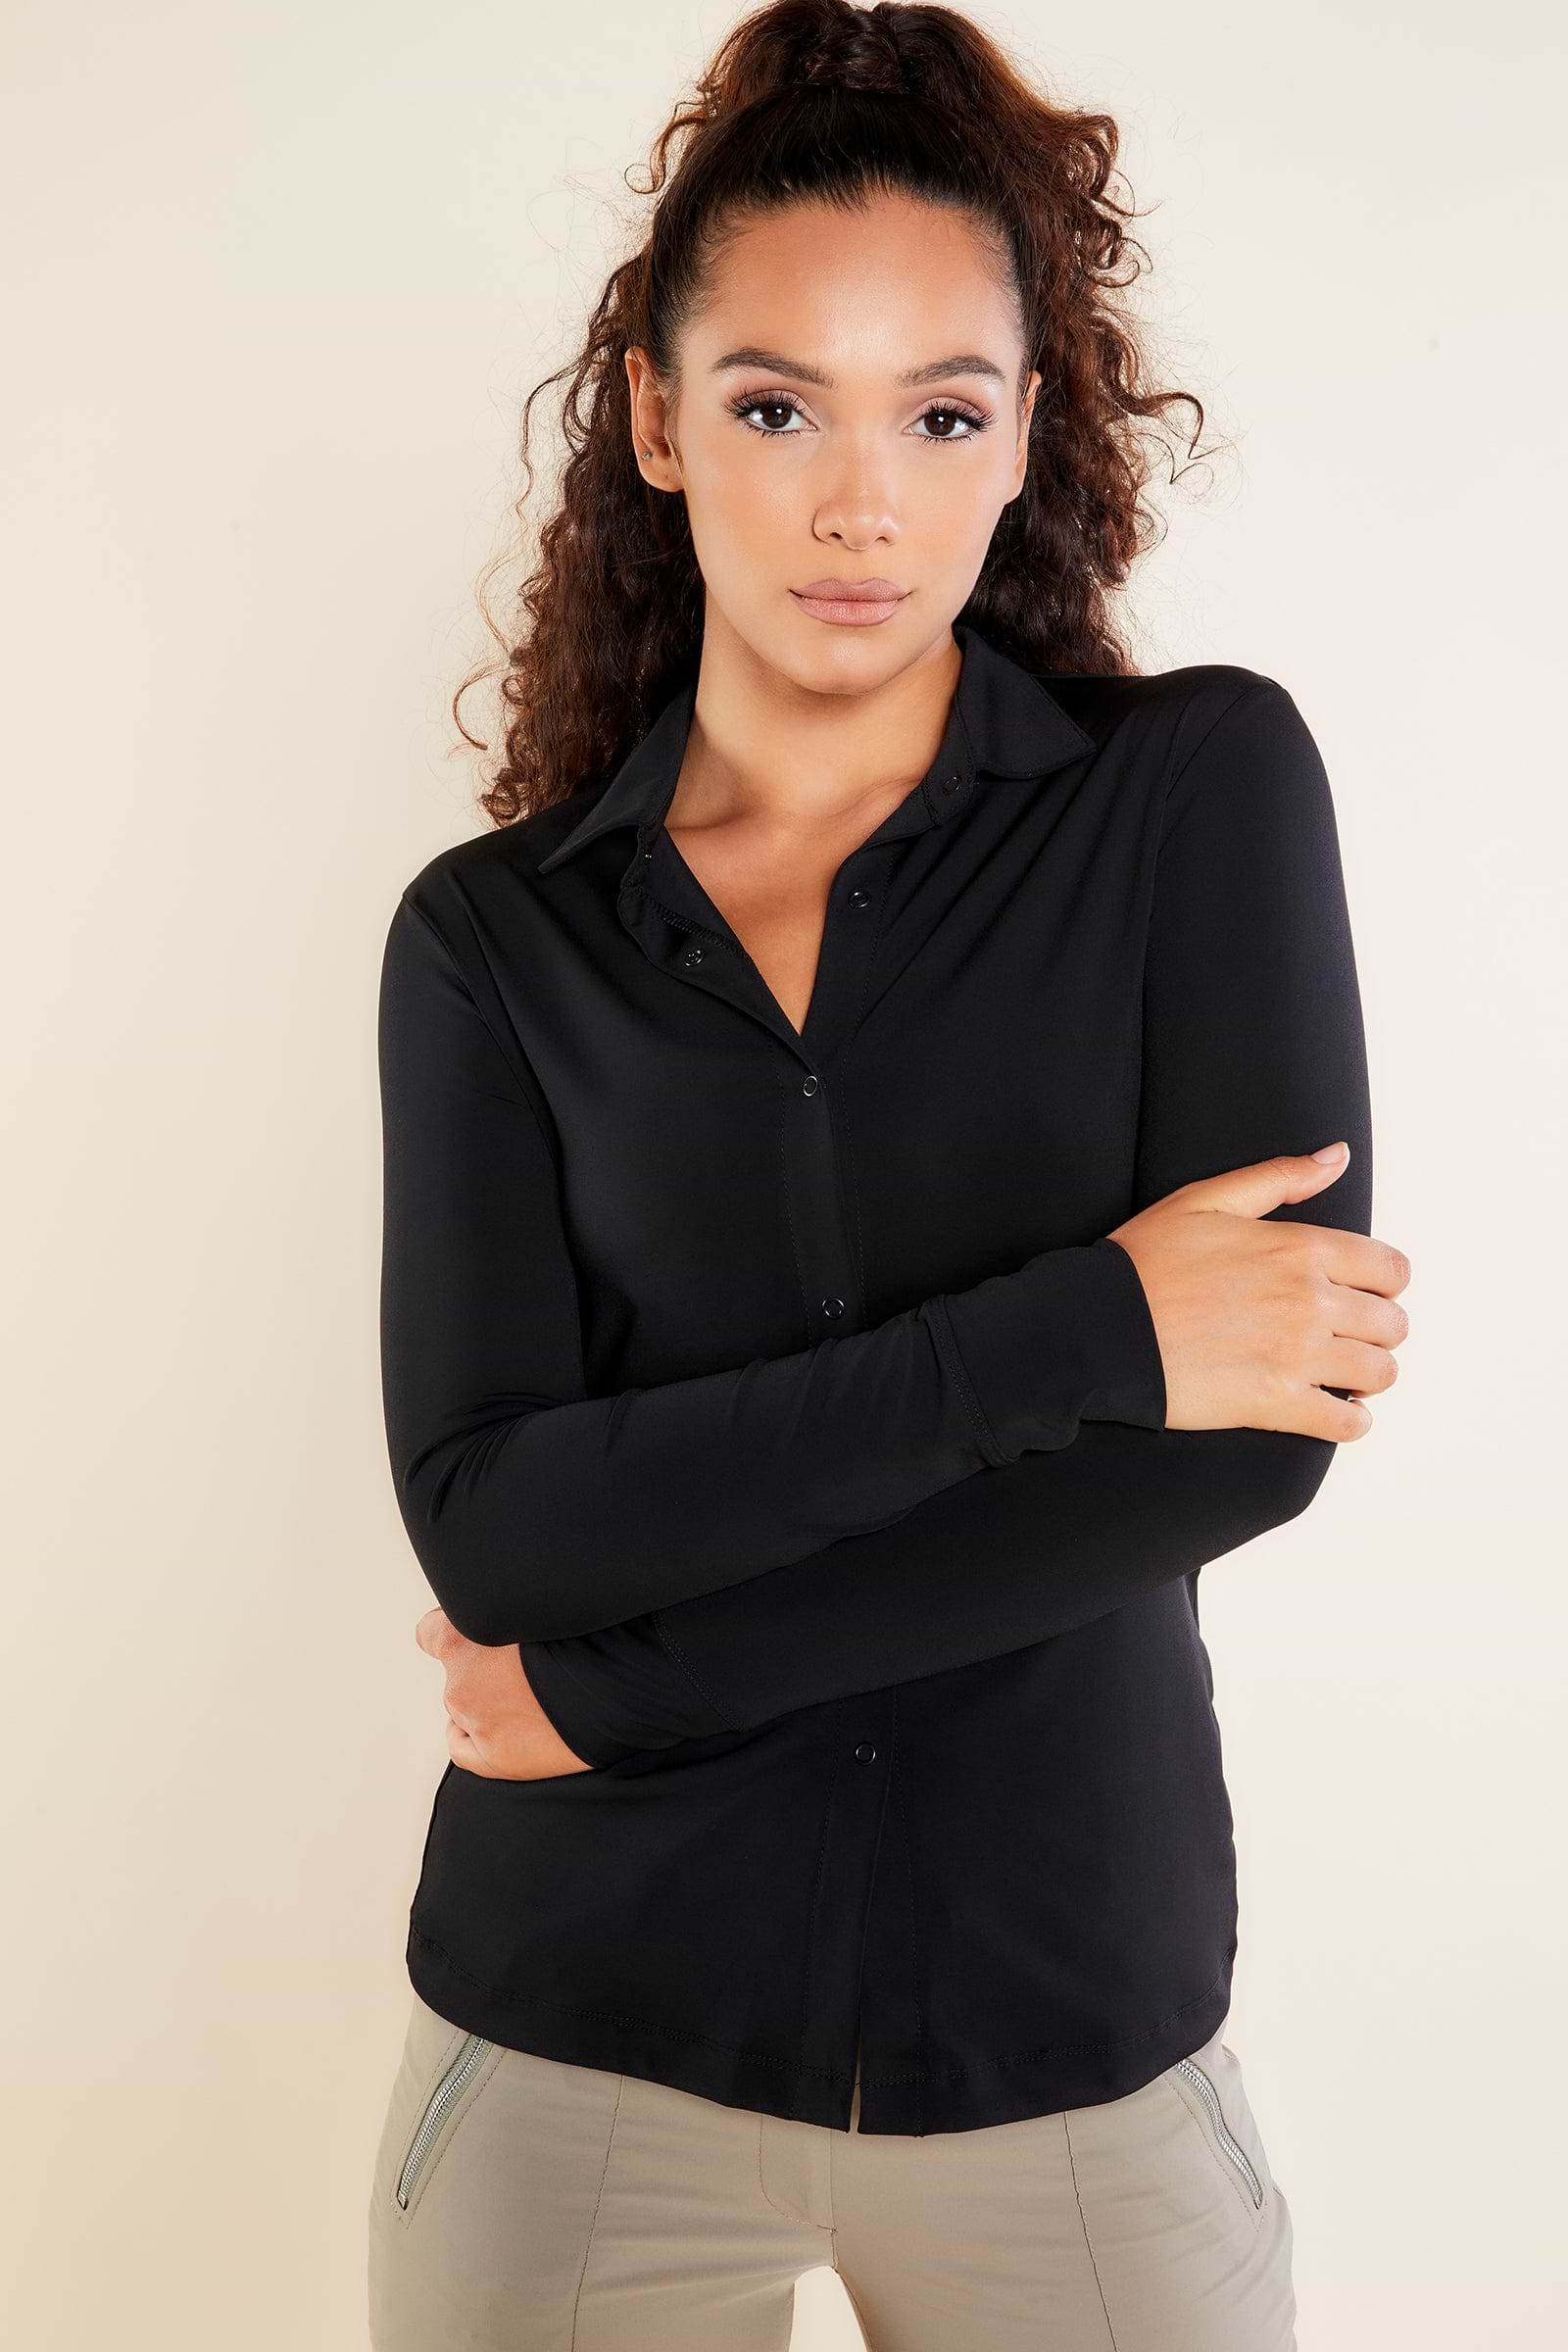 The Best Travel Top. Woman Showing the Front Profile of a Danica Snap On Super Jersey Top in Black